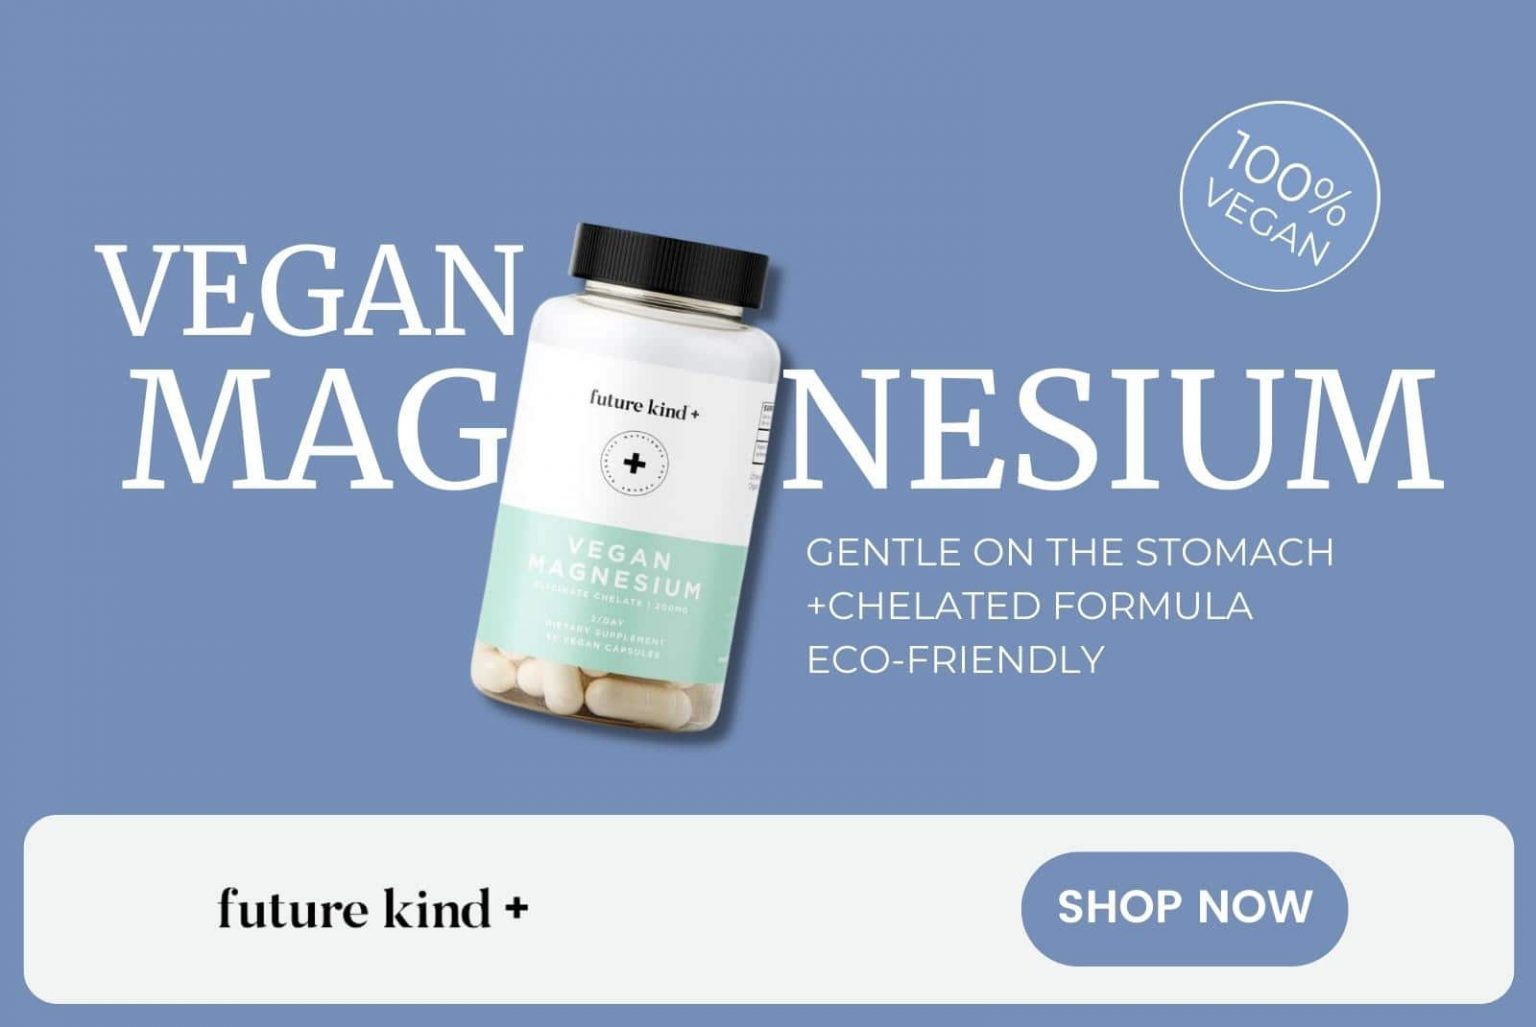 Half of all Americans are not getting enough magnesium, which can impact sleep quality, anxiety, energy and muscle function. Future kind+ use a super form of magnesium that is gentle on the stomach and better absorbed.